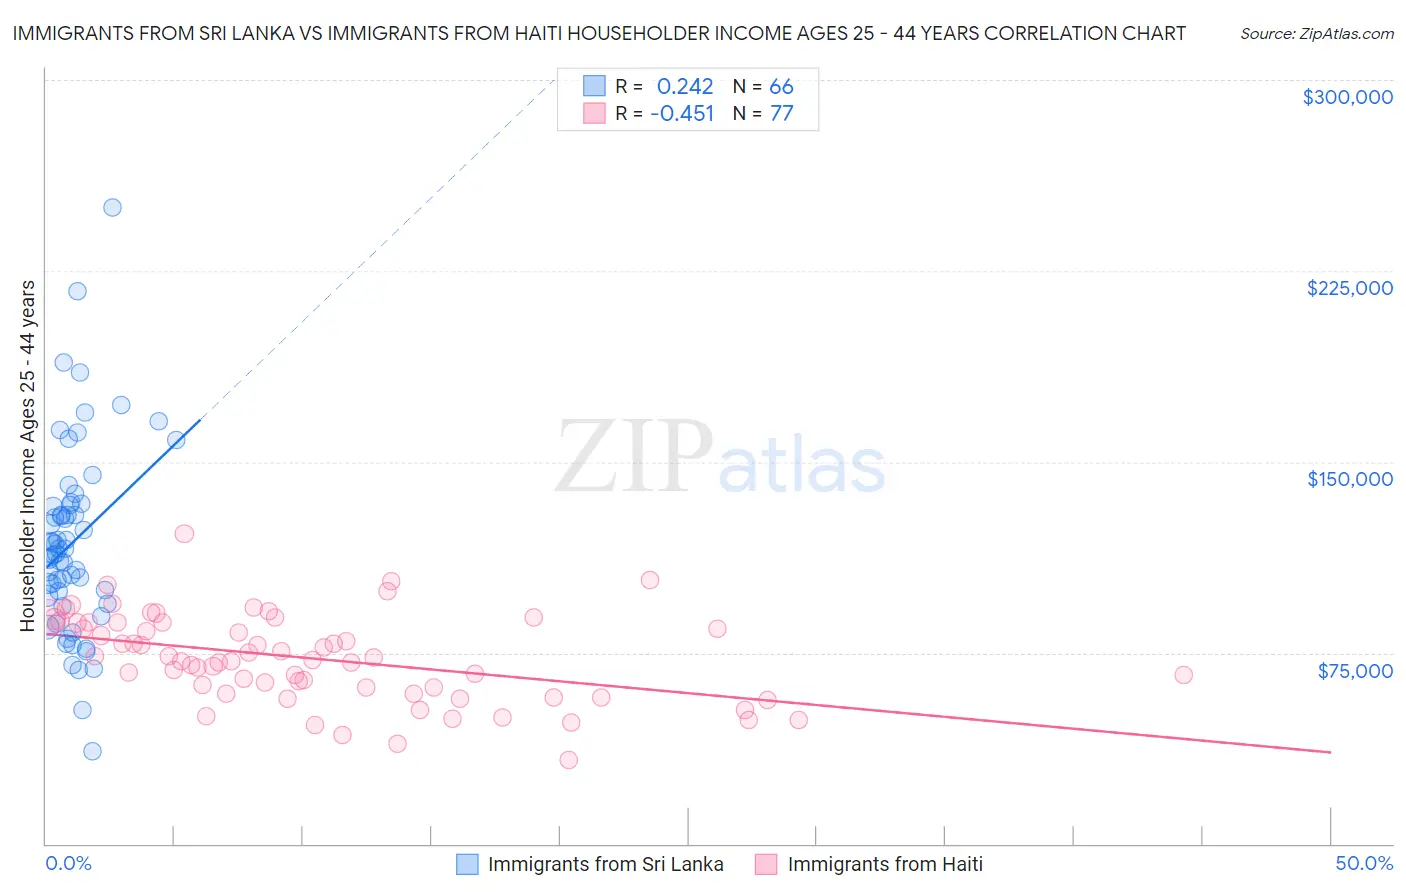 Immigrants from Sri Lanka vs Immigrants from Haiti Householder Income Ages 25 - 44 years